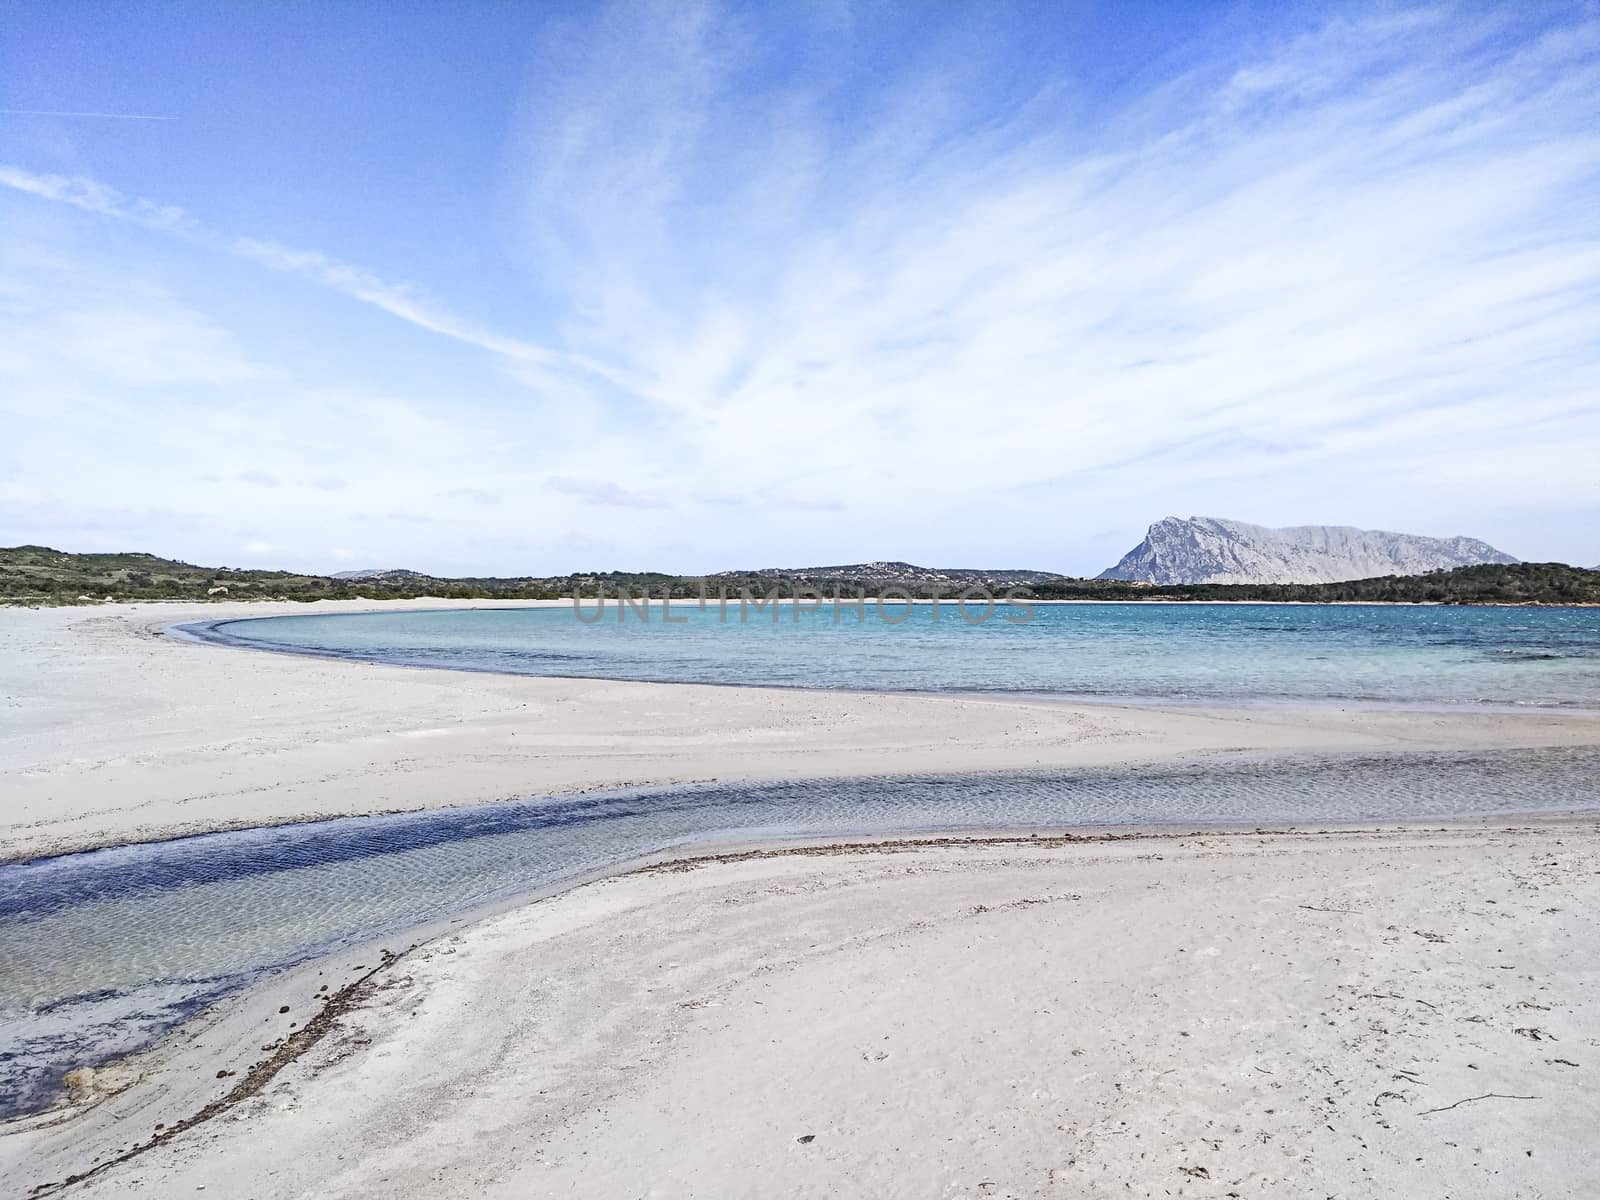 Beautiful deserted white beach in Sardinia, Lu Impostu, with sea in various shades of blue, curves of sand marked by water and the island of Tavolara in the background with blue sky